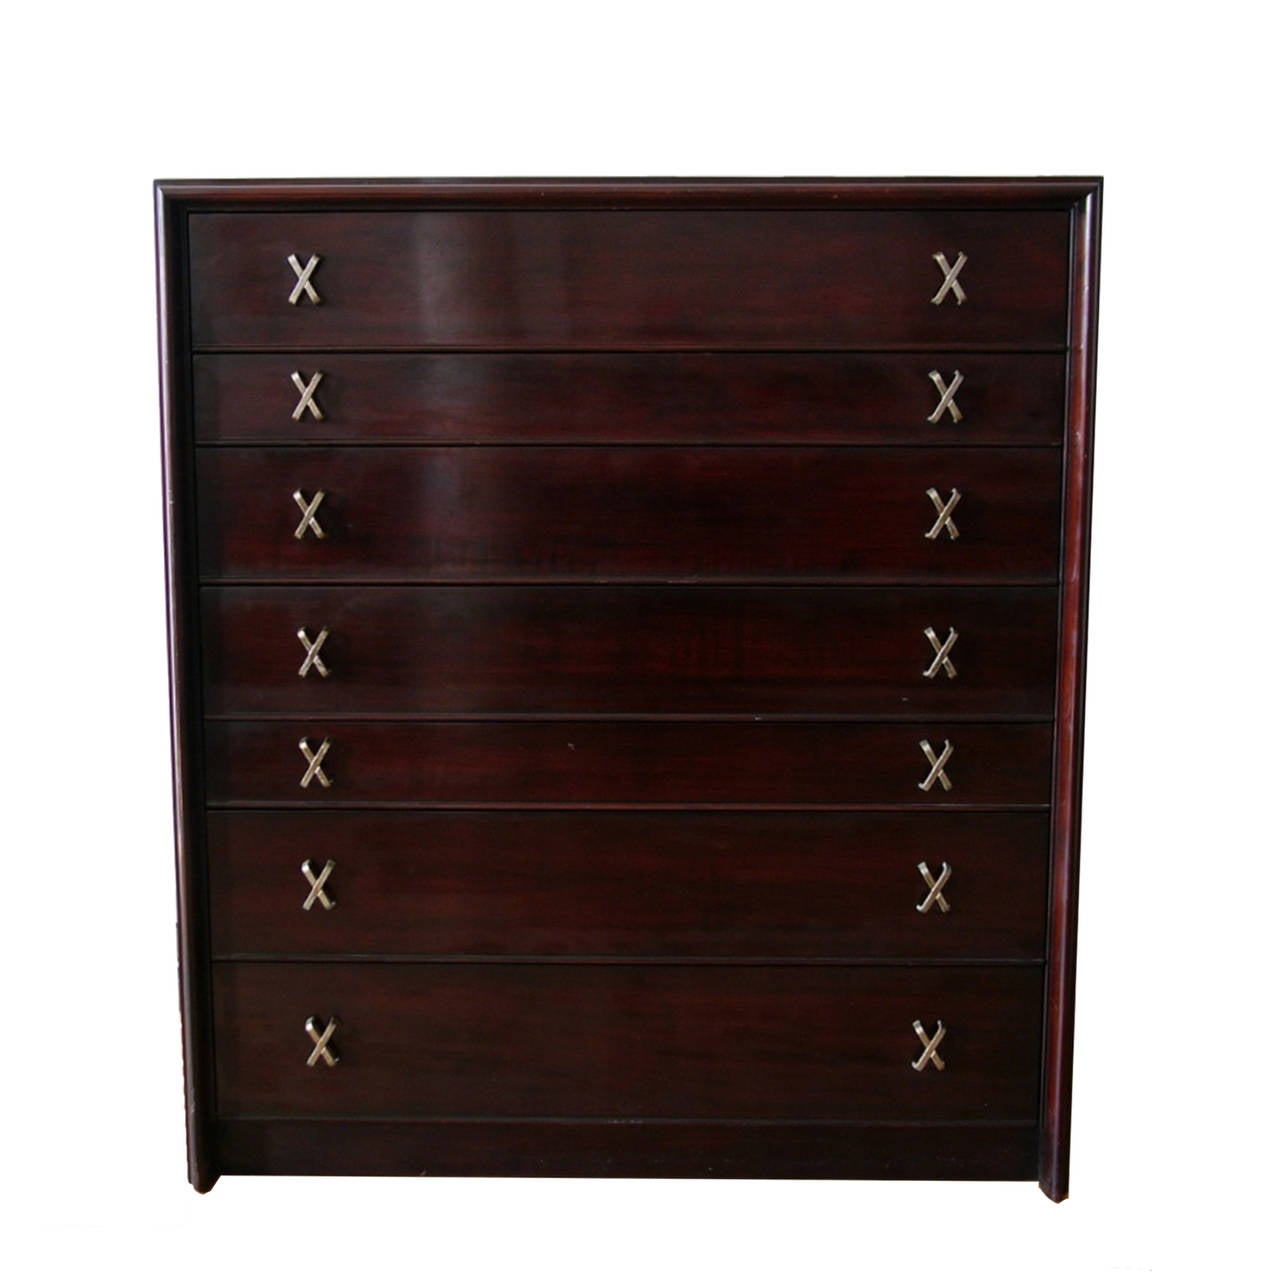 Handsome pair of Frankl seven-drawer chests with nickel plated X-pulls.